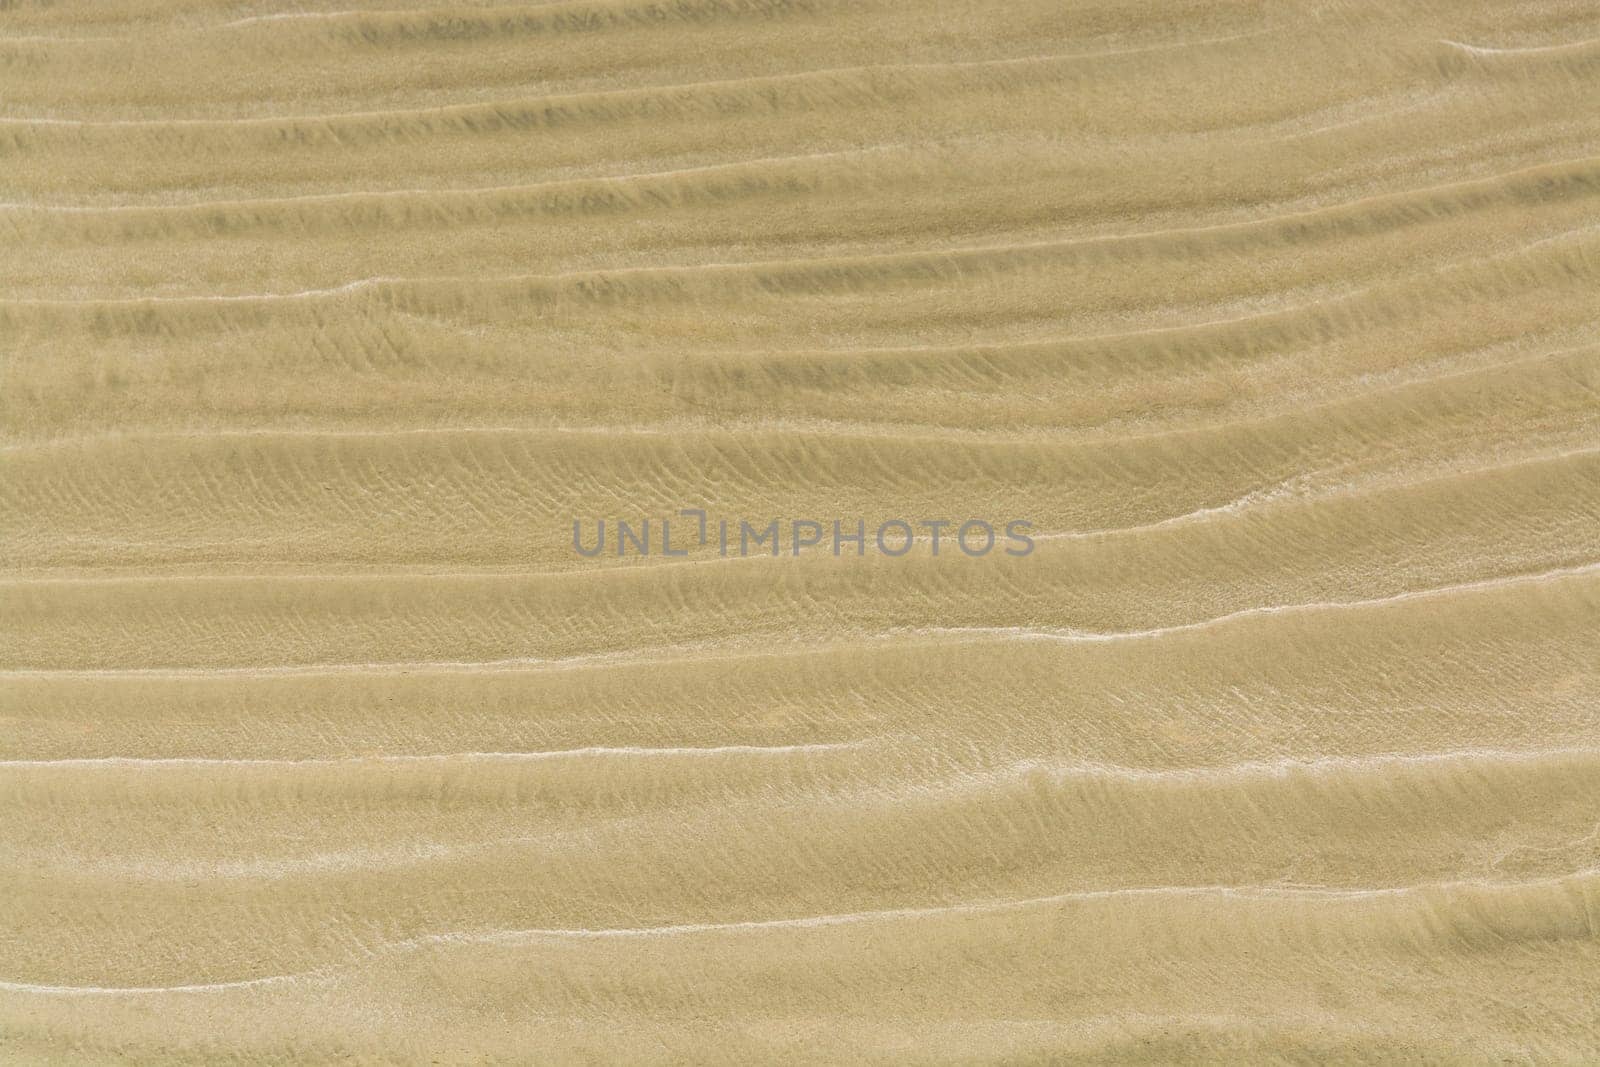 Waves of sand on one of Pacific ocean beaches by Imagenet